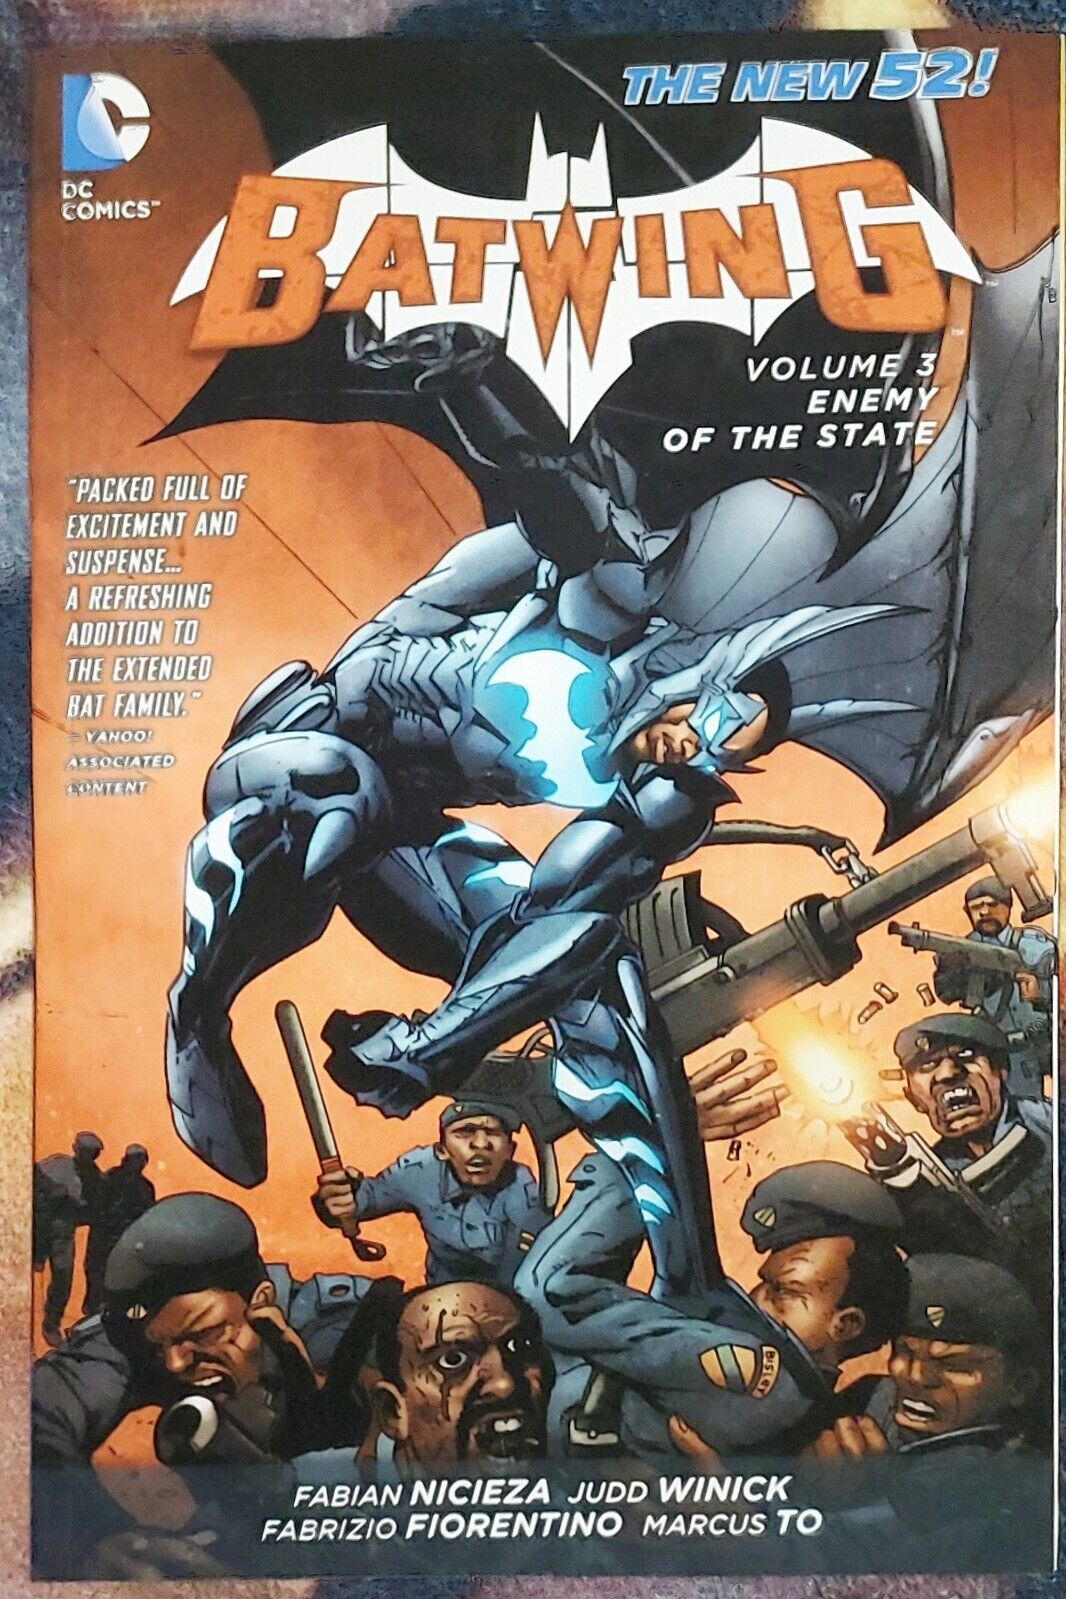 Batwing Vol. 3: Enemy of the State [The New 52]